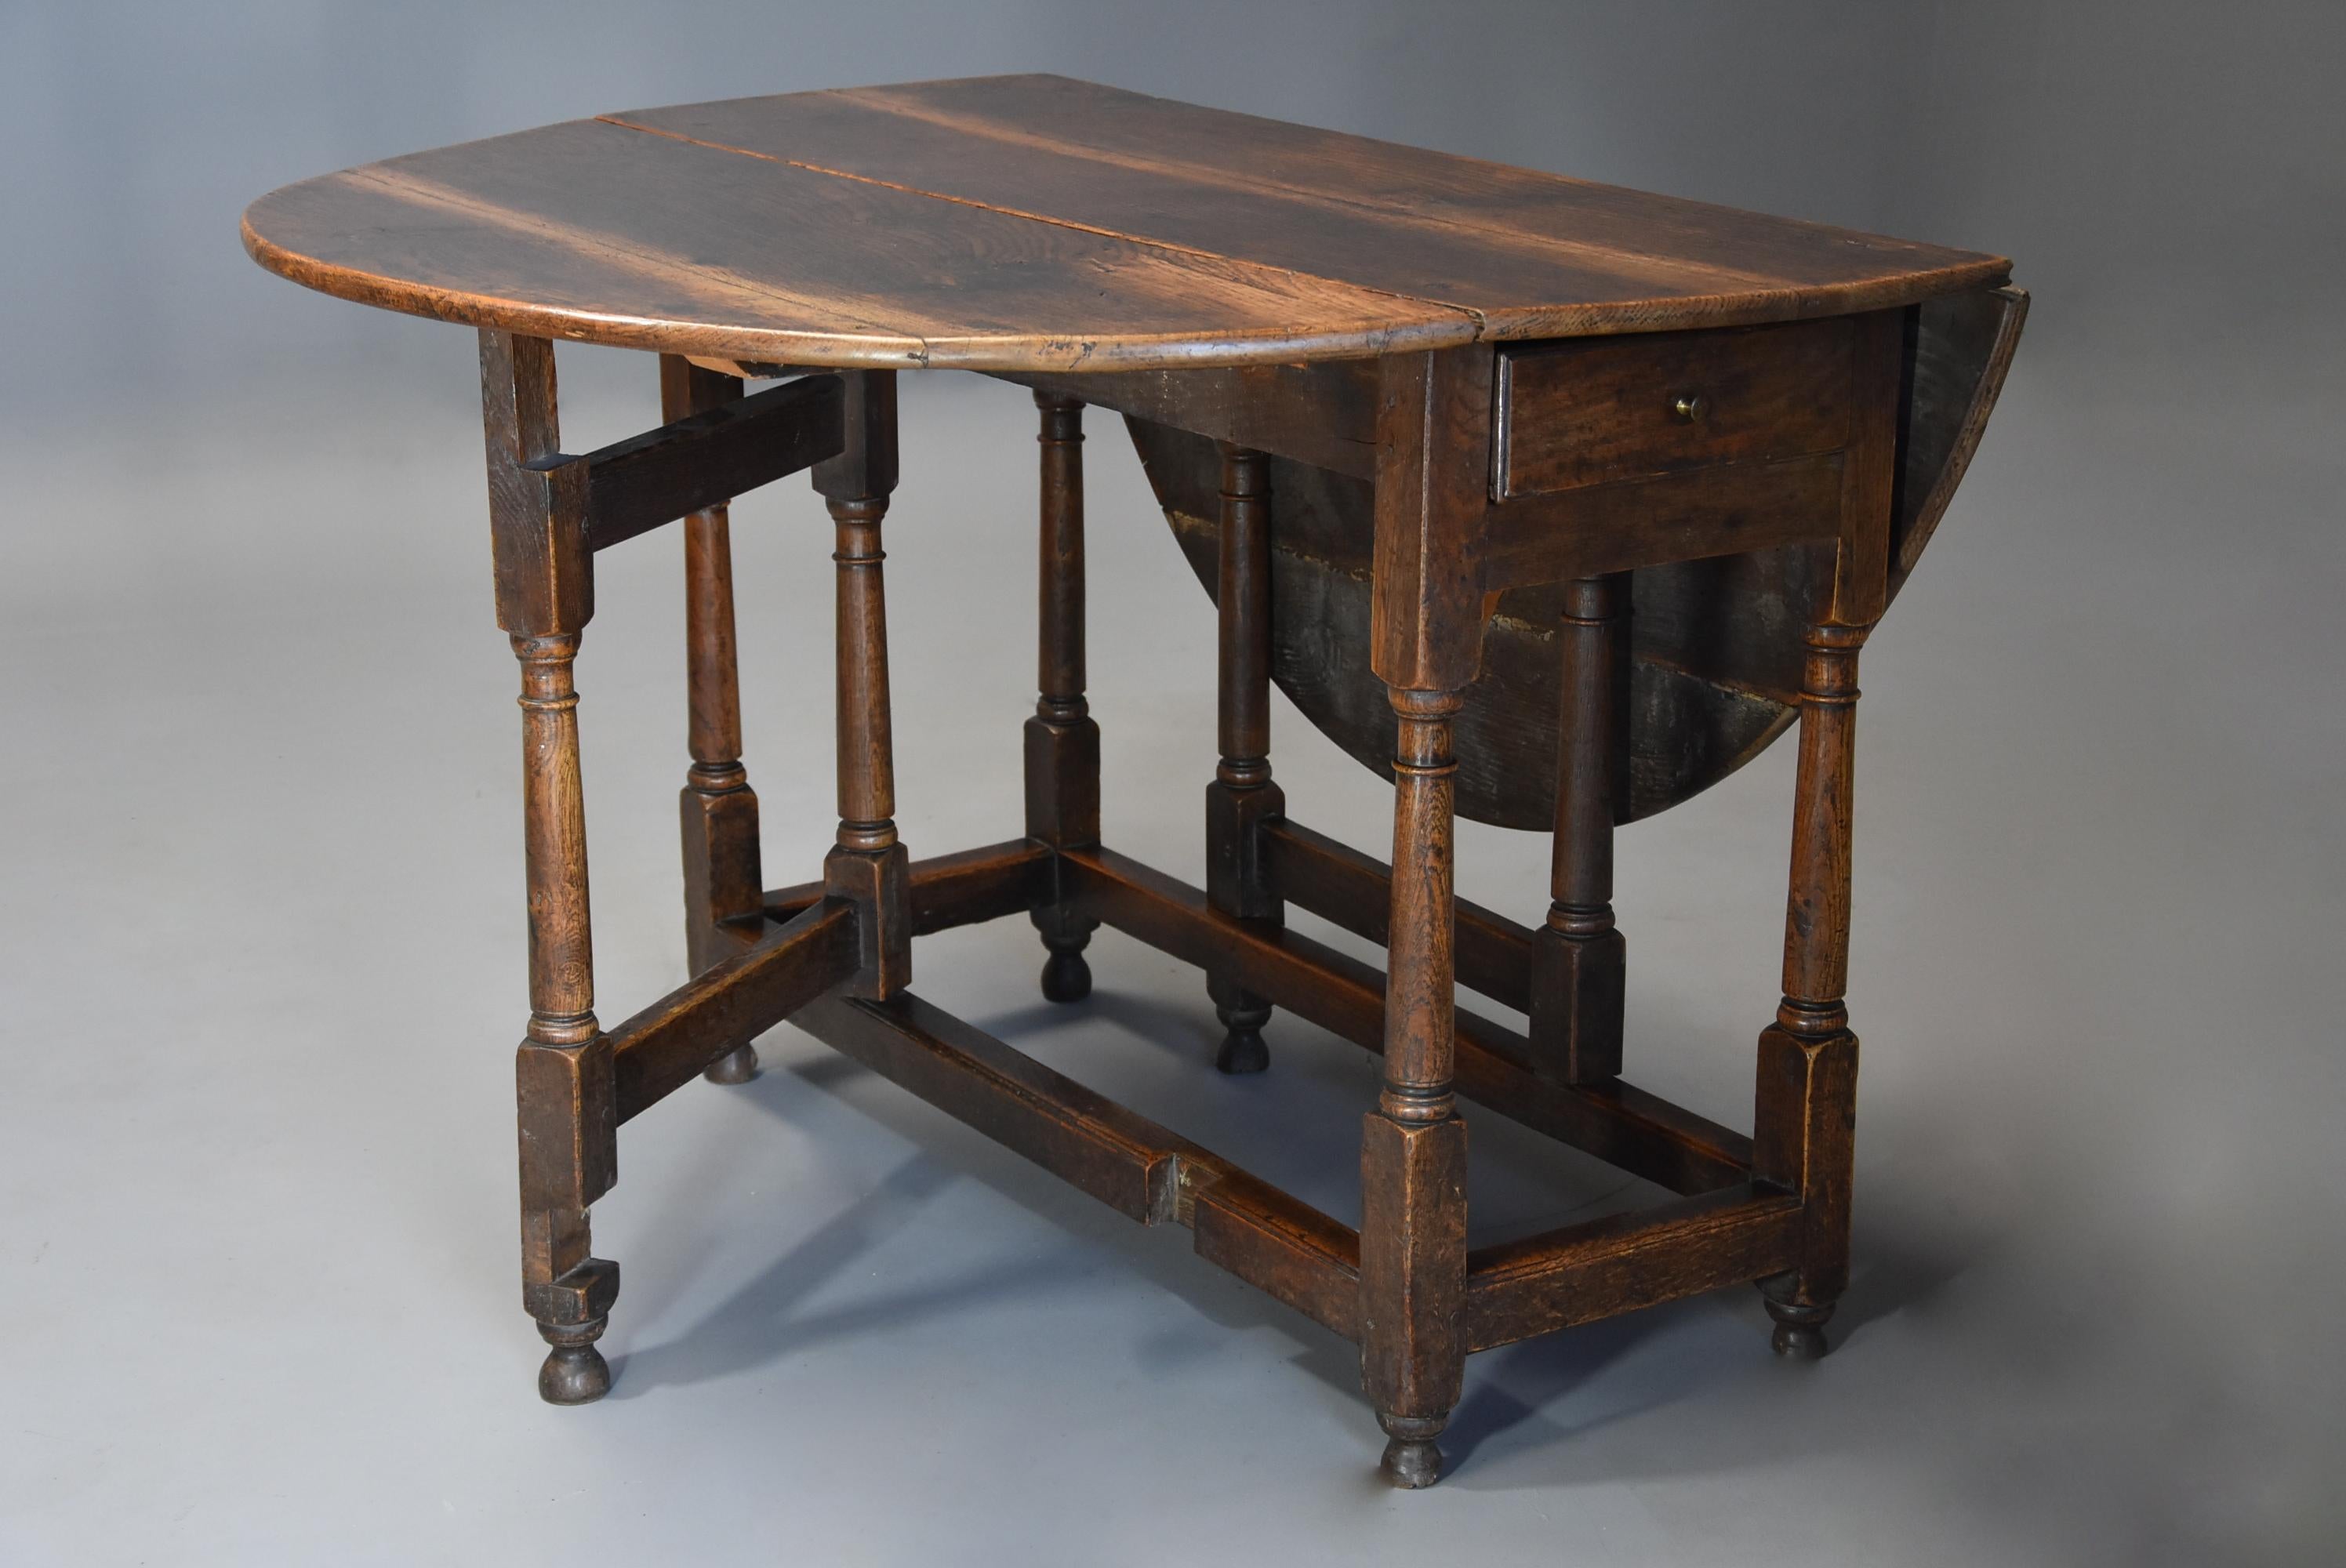 English Early 18th Century Oak Gateleg Table with Superb Original Patina For Sale 1